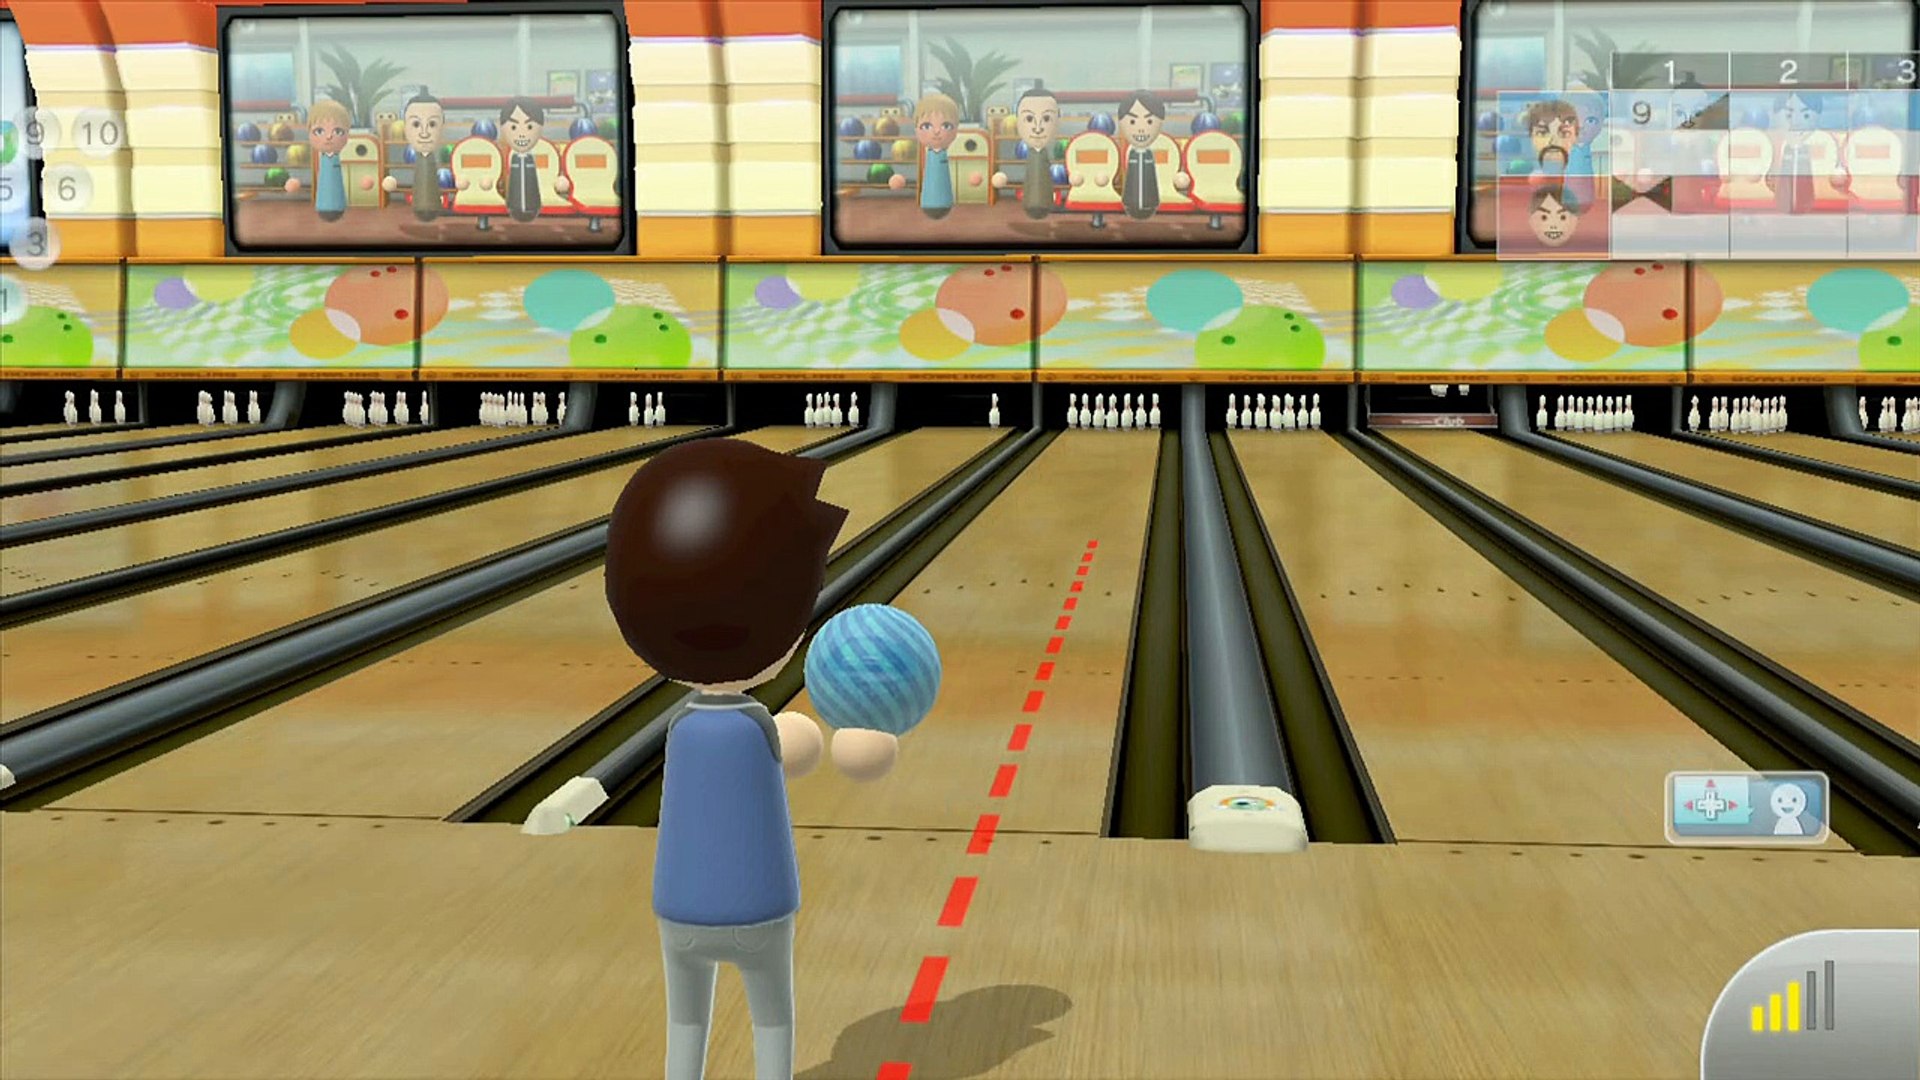 Wii Sports Club: 10-Pin Bowling (Online Match) - video Dailymotion